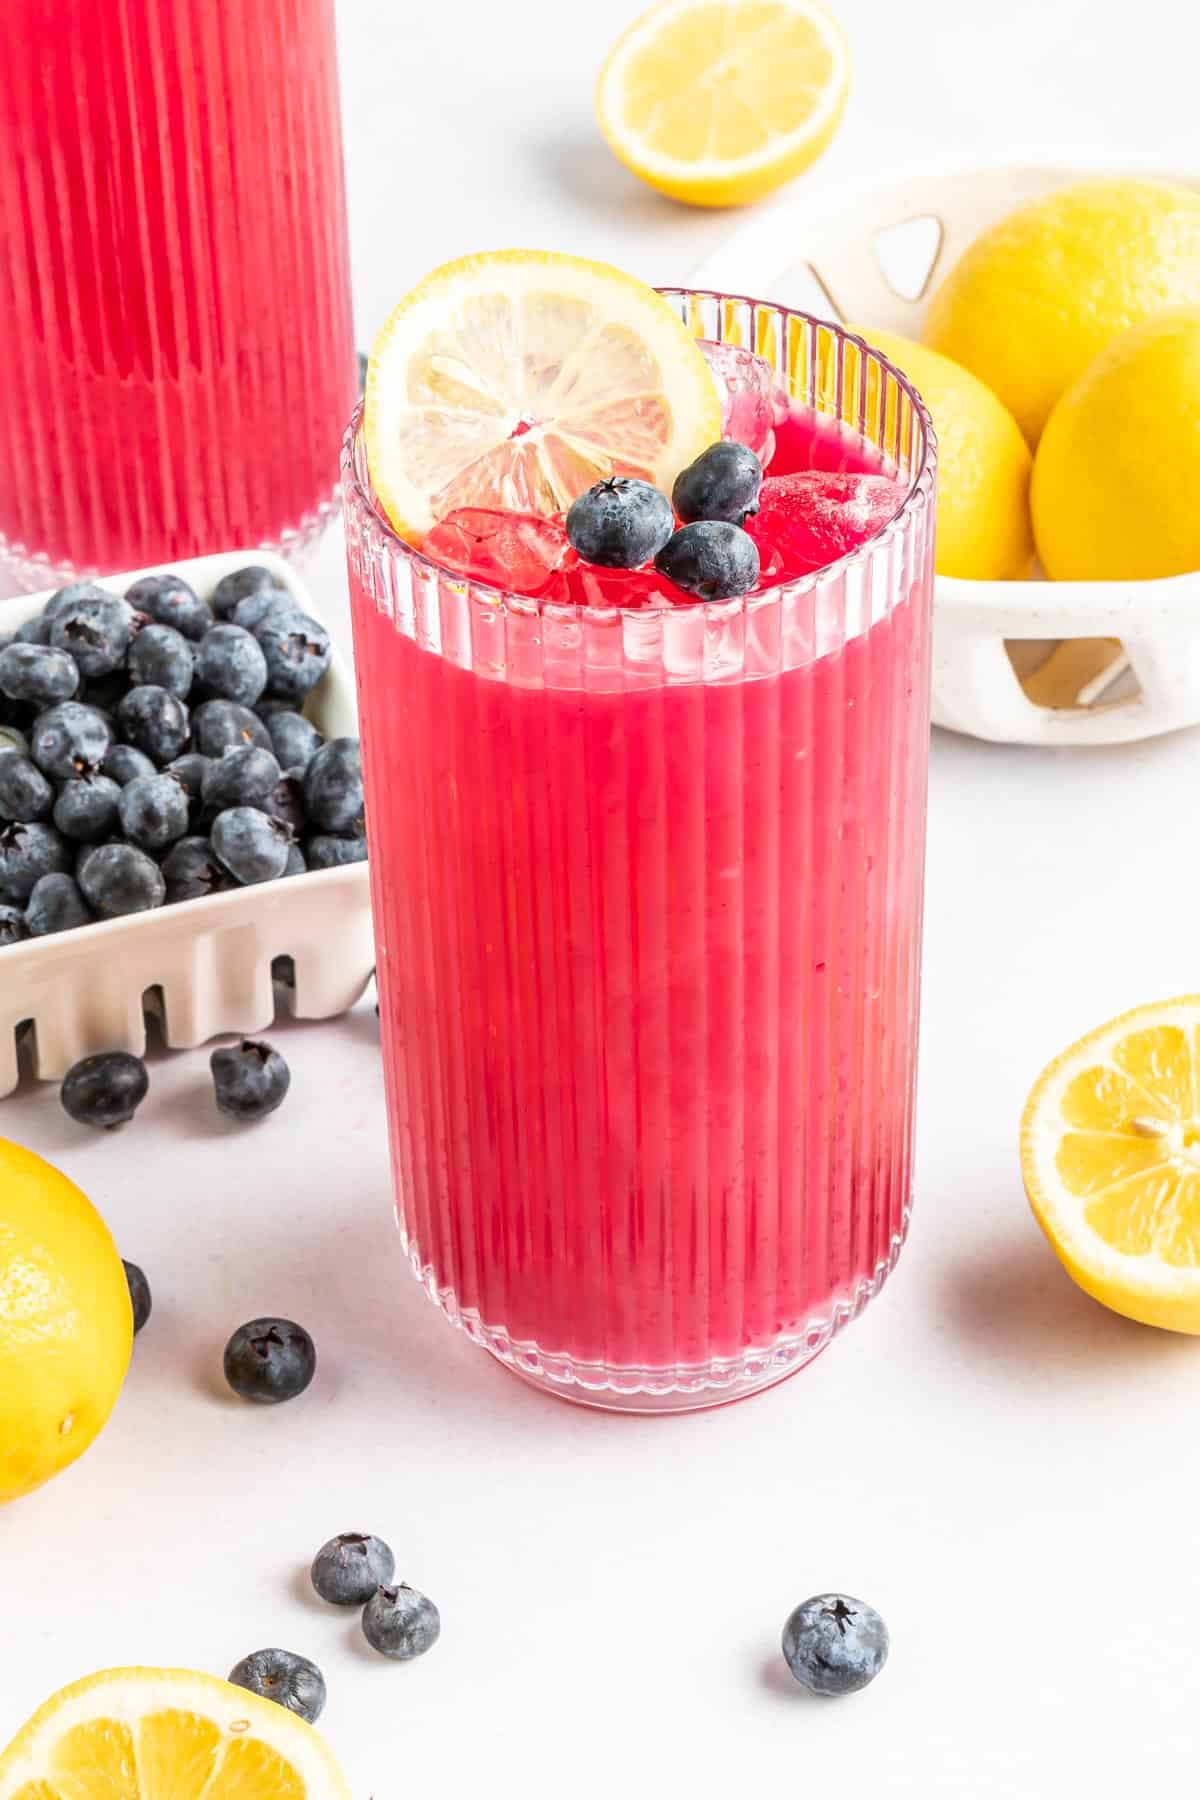 A glass of blueberry lemonade garnished with sliced lemon and fresh blueberries.